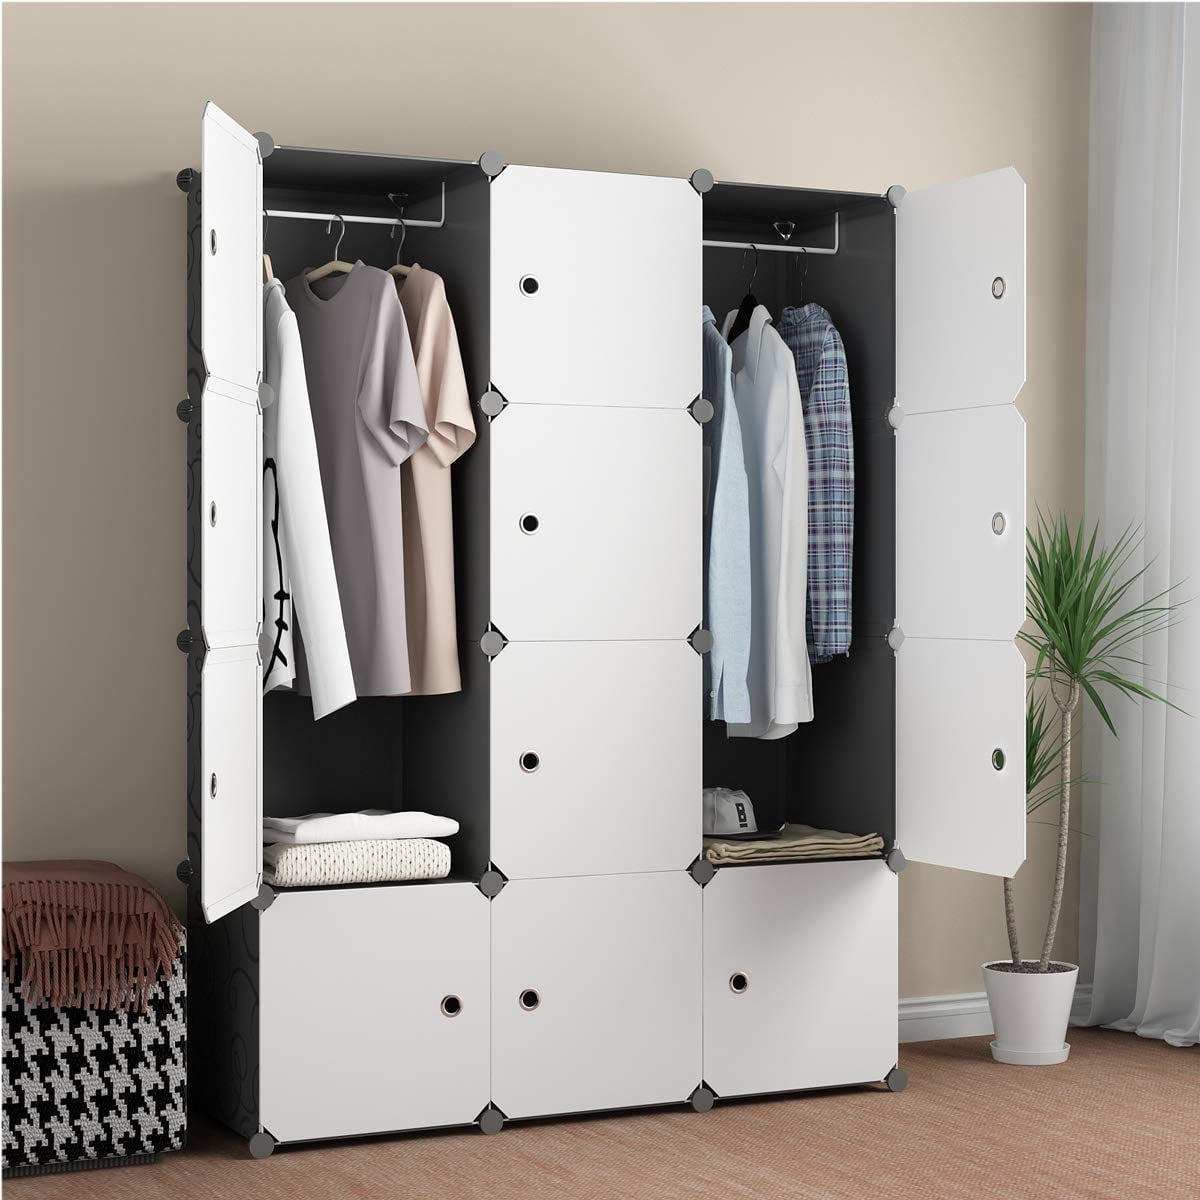 10 Tier EVELYN LIVING 5/10 Tier Hanging Wardrobe Storage Shelf Organiser Breathable Closet Pockets Unit Cupboards Shelves Foldable for Clothes Sweaters Shoes Accessories